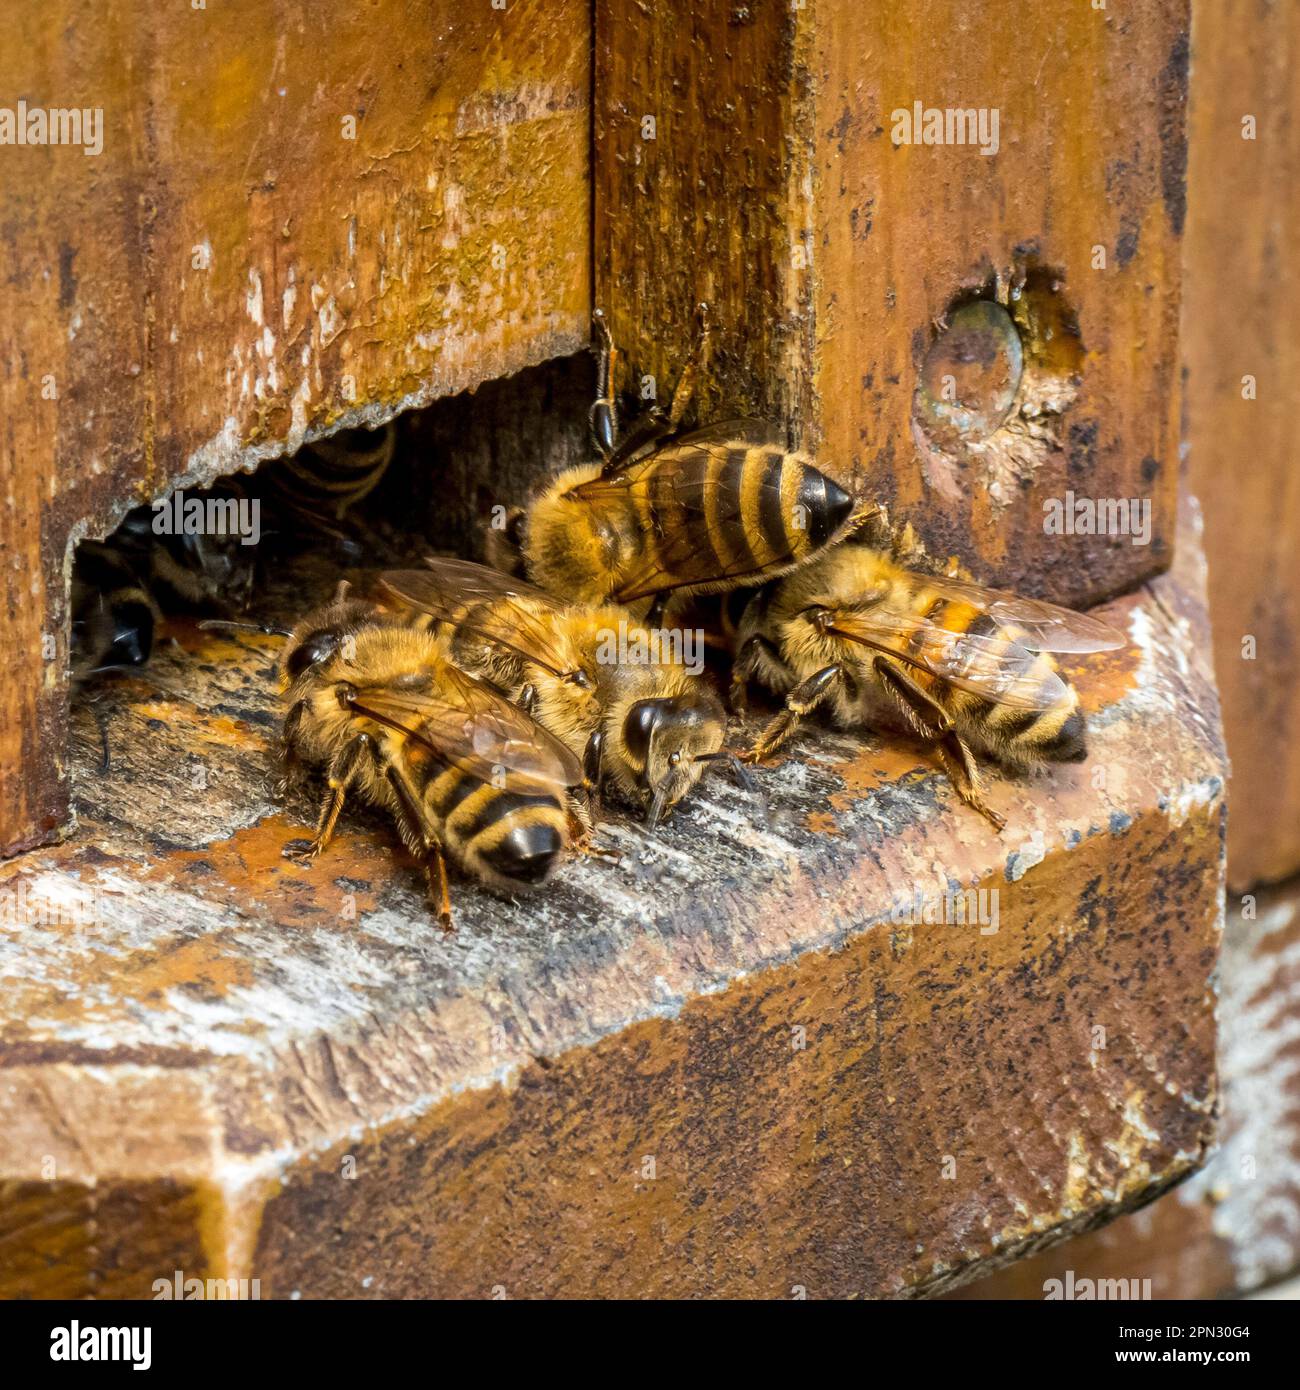 Busy colony of Western honey bees, known as Apis mellifera, can be seen entering and exiting their wooden hive with cooperation and teamwork. Stock Photo